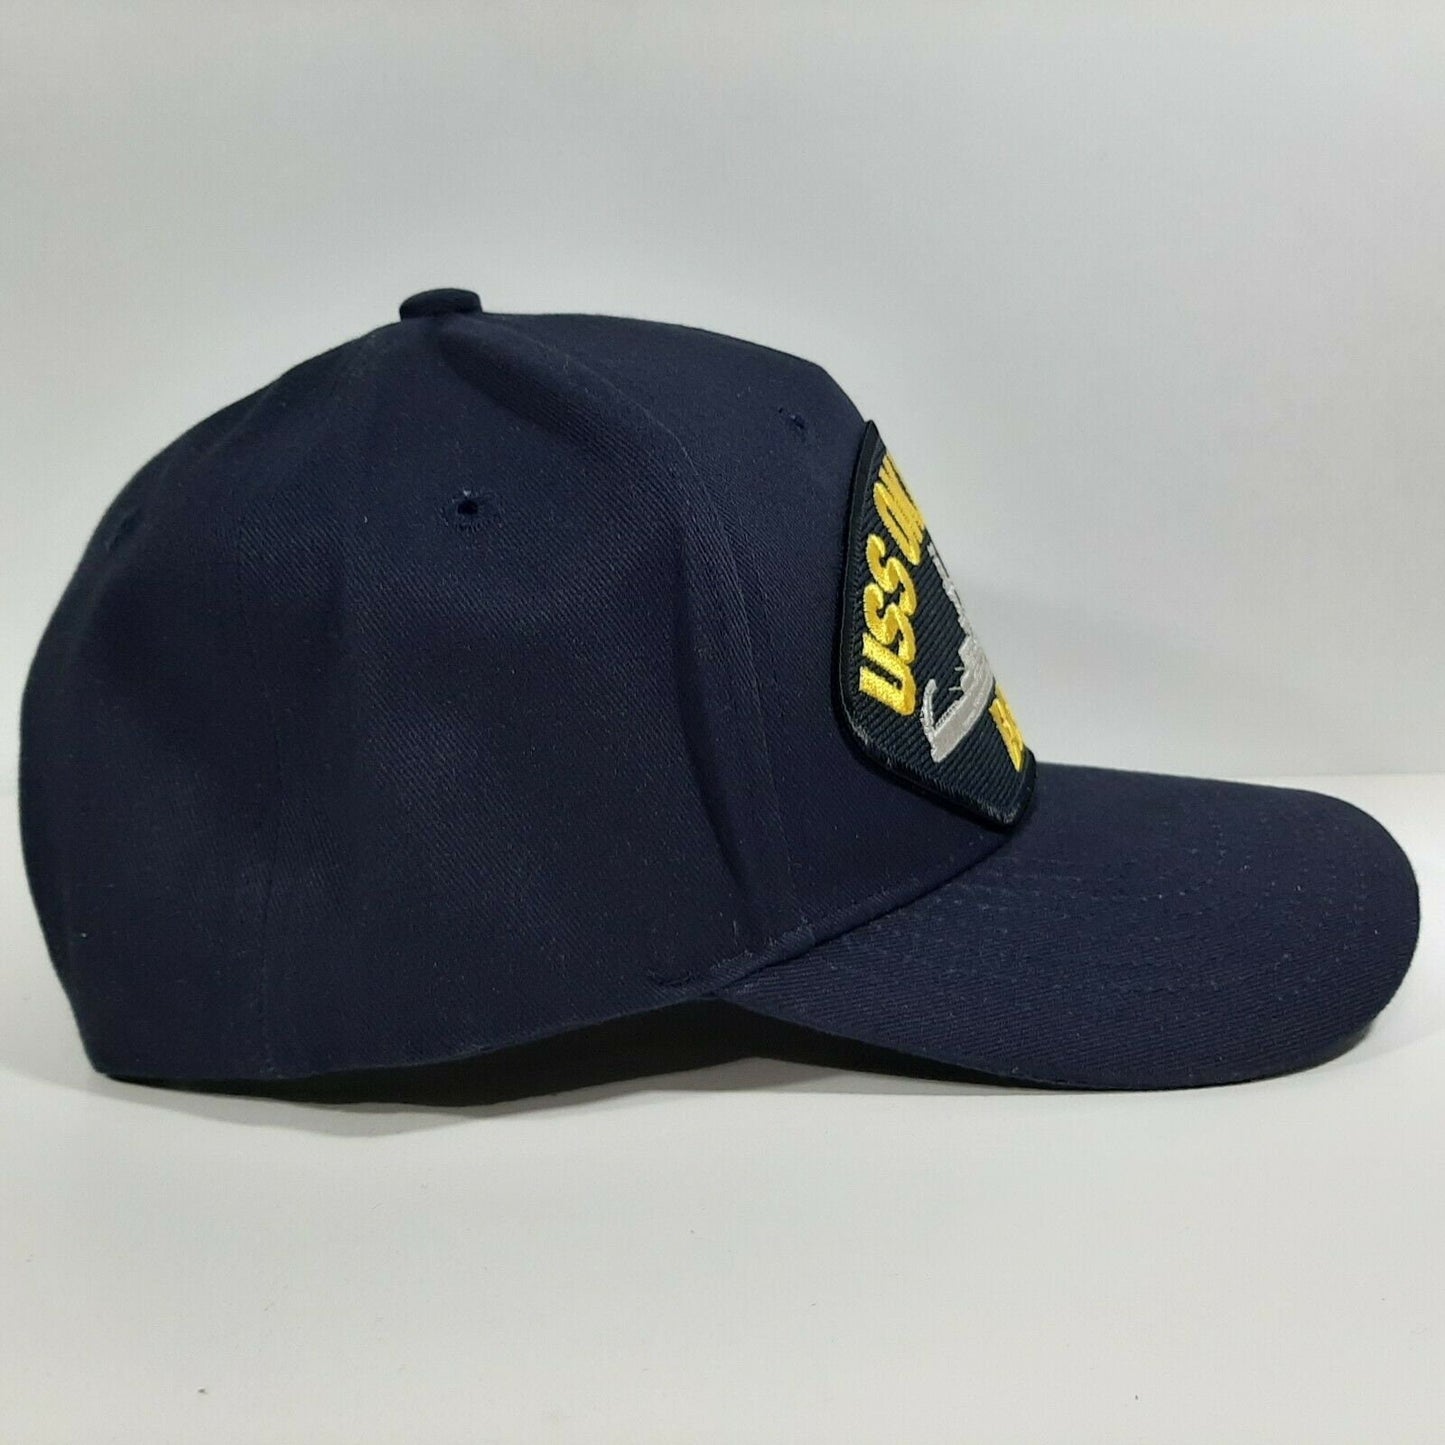 USS Oklahoma BB-37 Embroidered Patch Hat Baseball Cap Adjustable Navy Blue